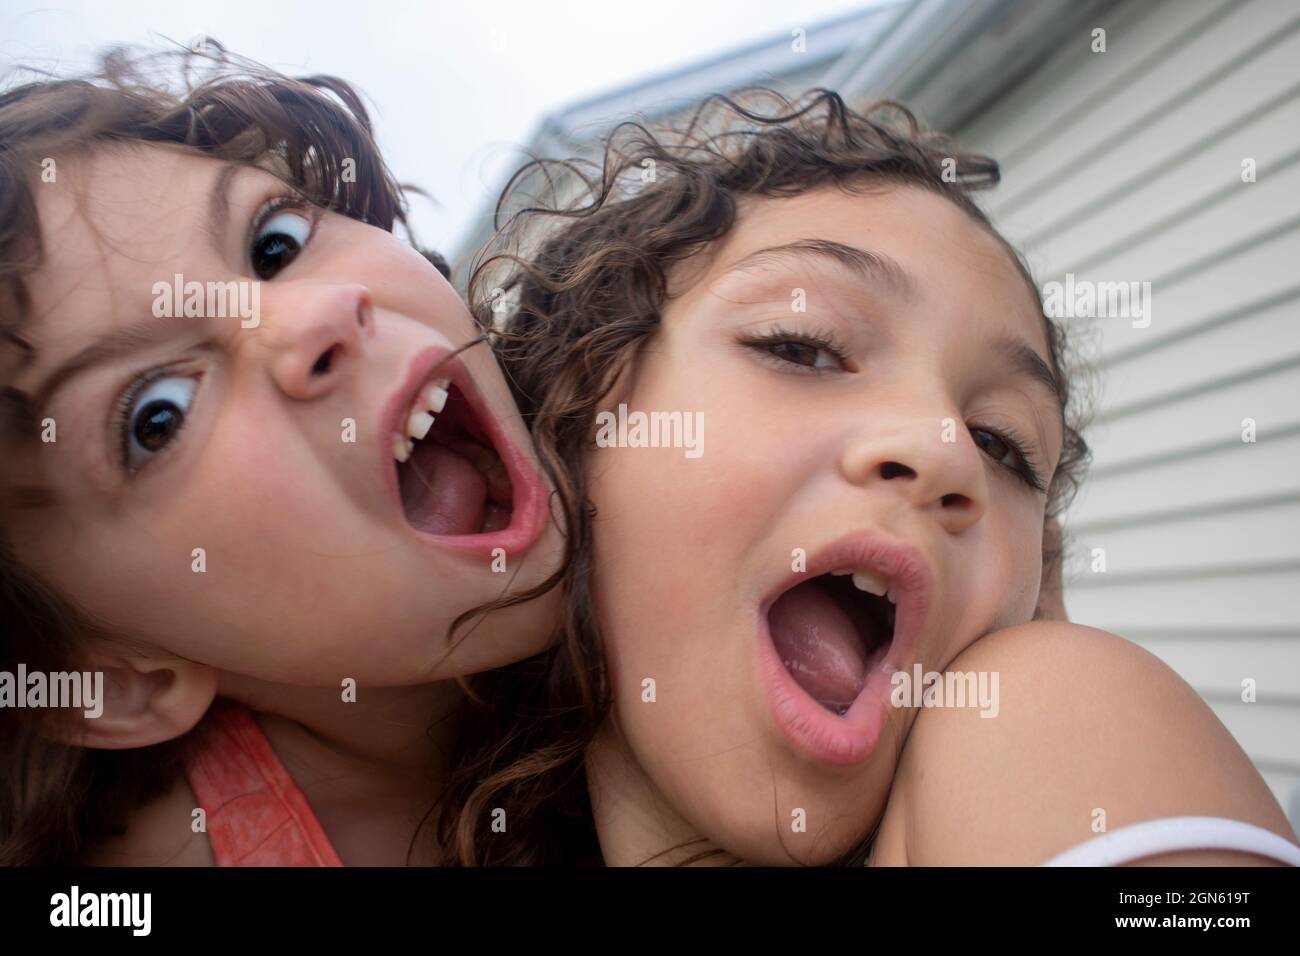 close up portrait of young girls having fun open mouth making silly faces at camera on a sunny summer day Stock Photo